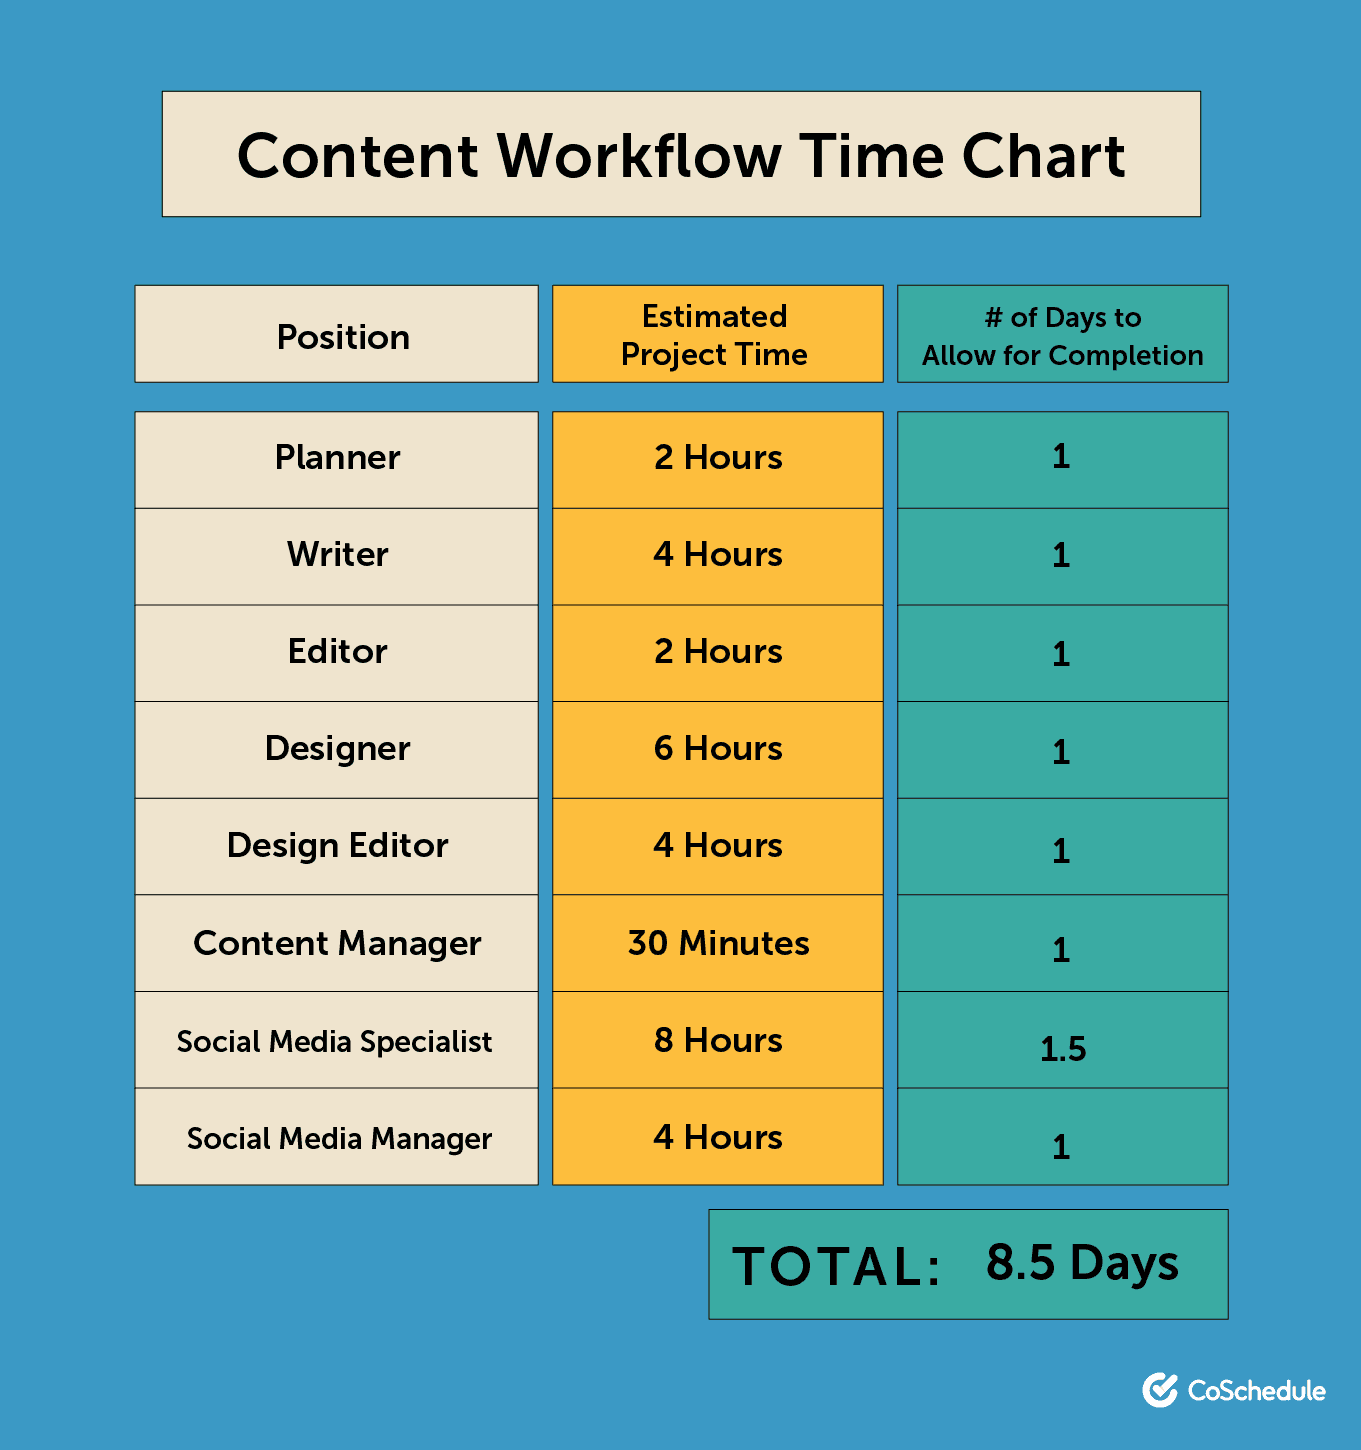 Content workflow time chart